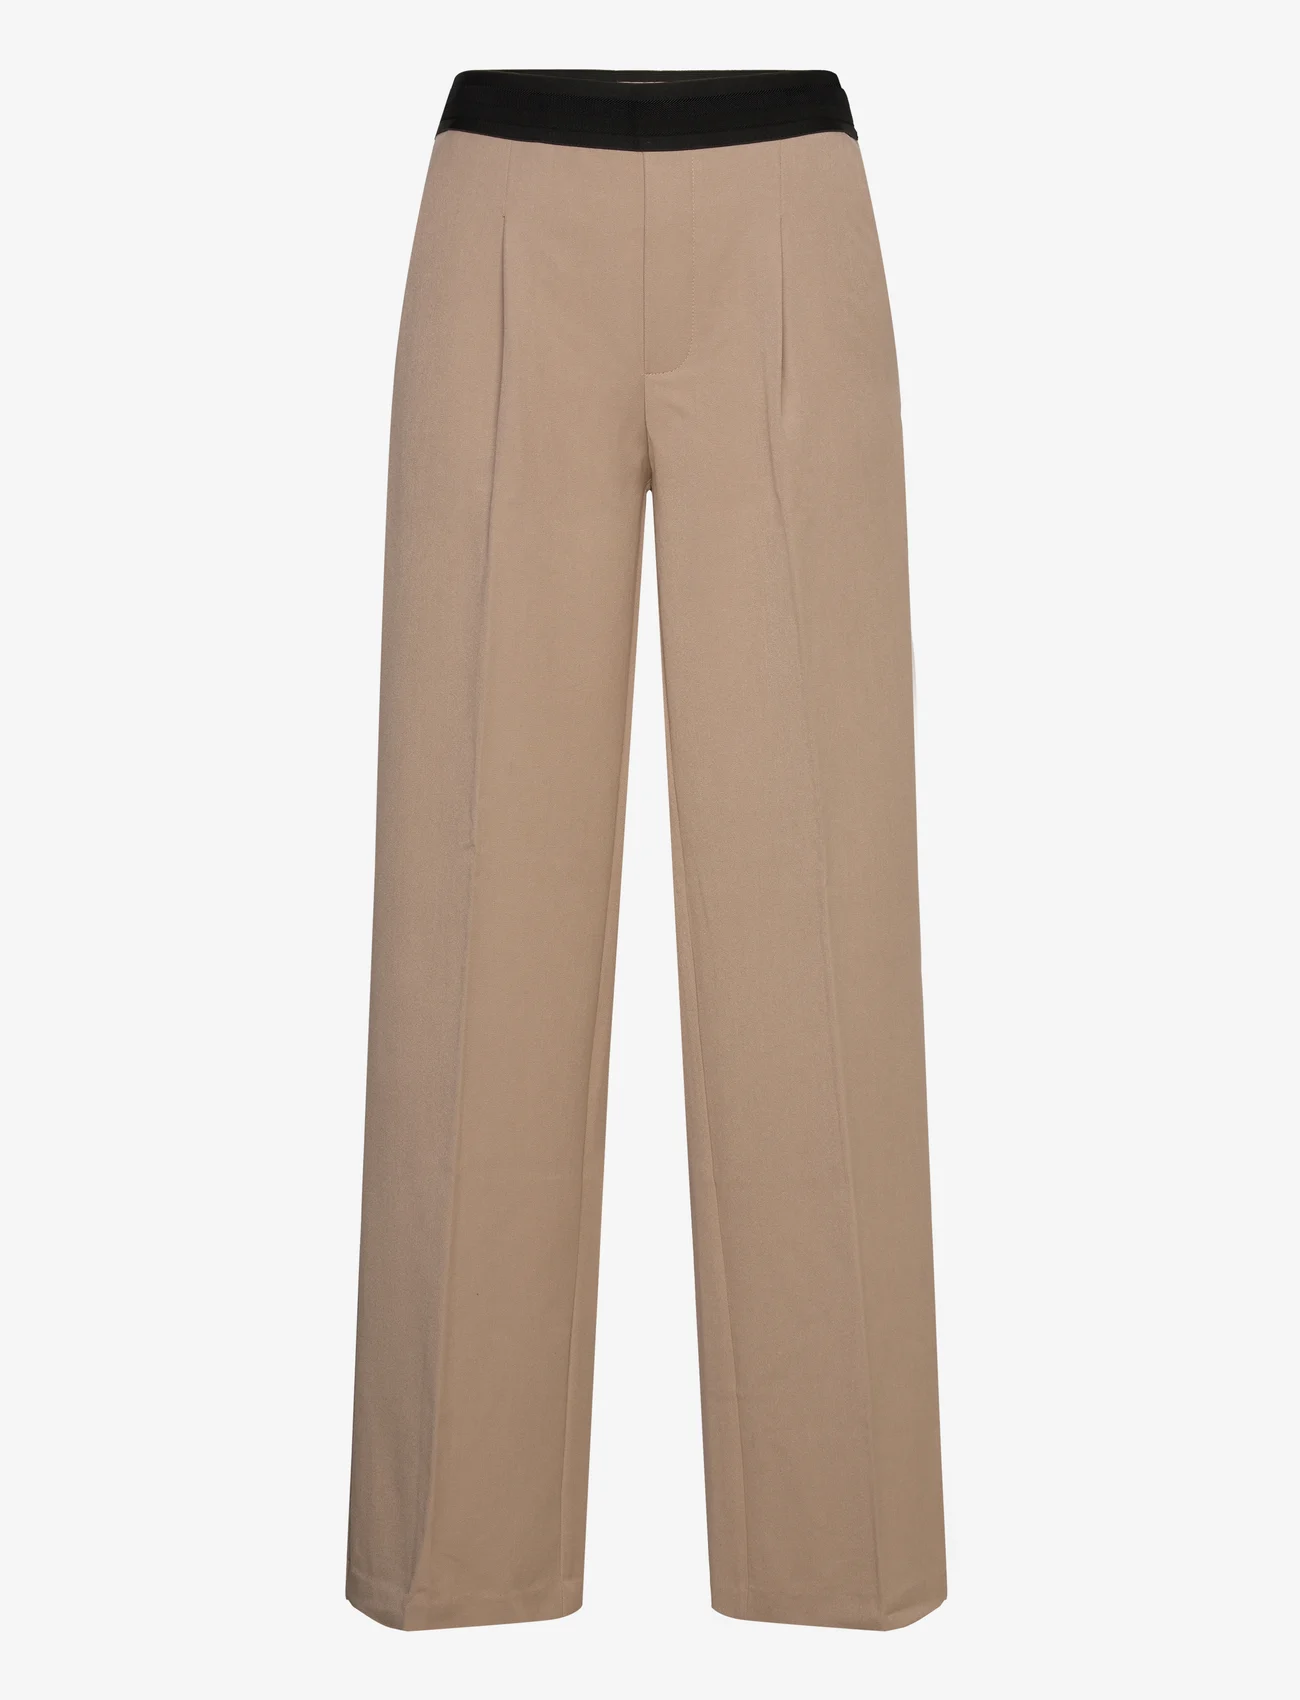 FREE/QUENT - FQKITTY-PANT - hosen mit weitem bein - simply taupe - 0